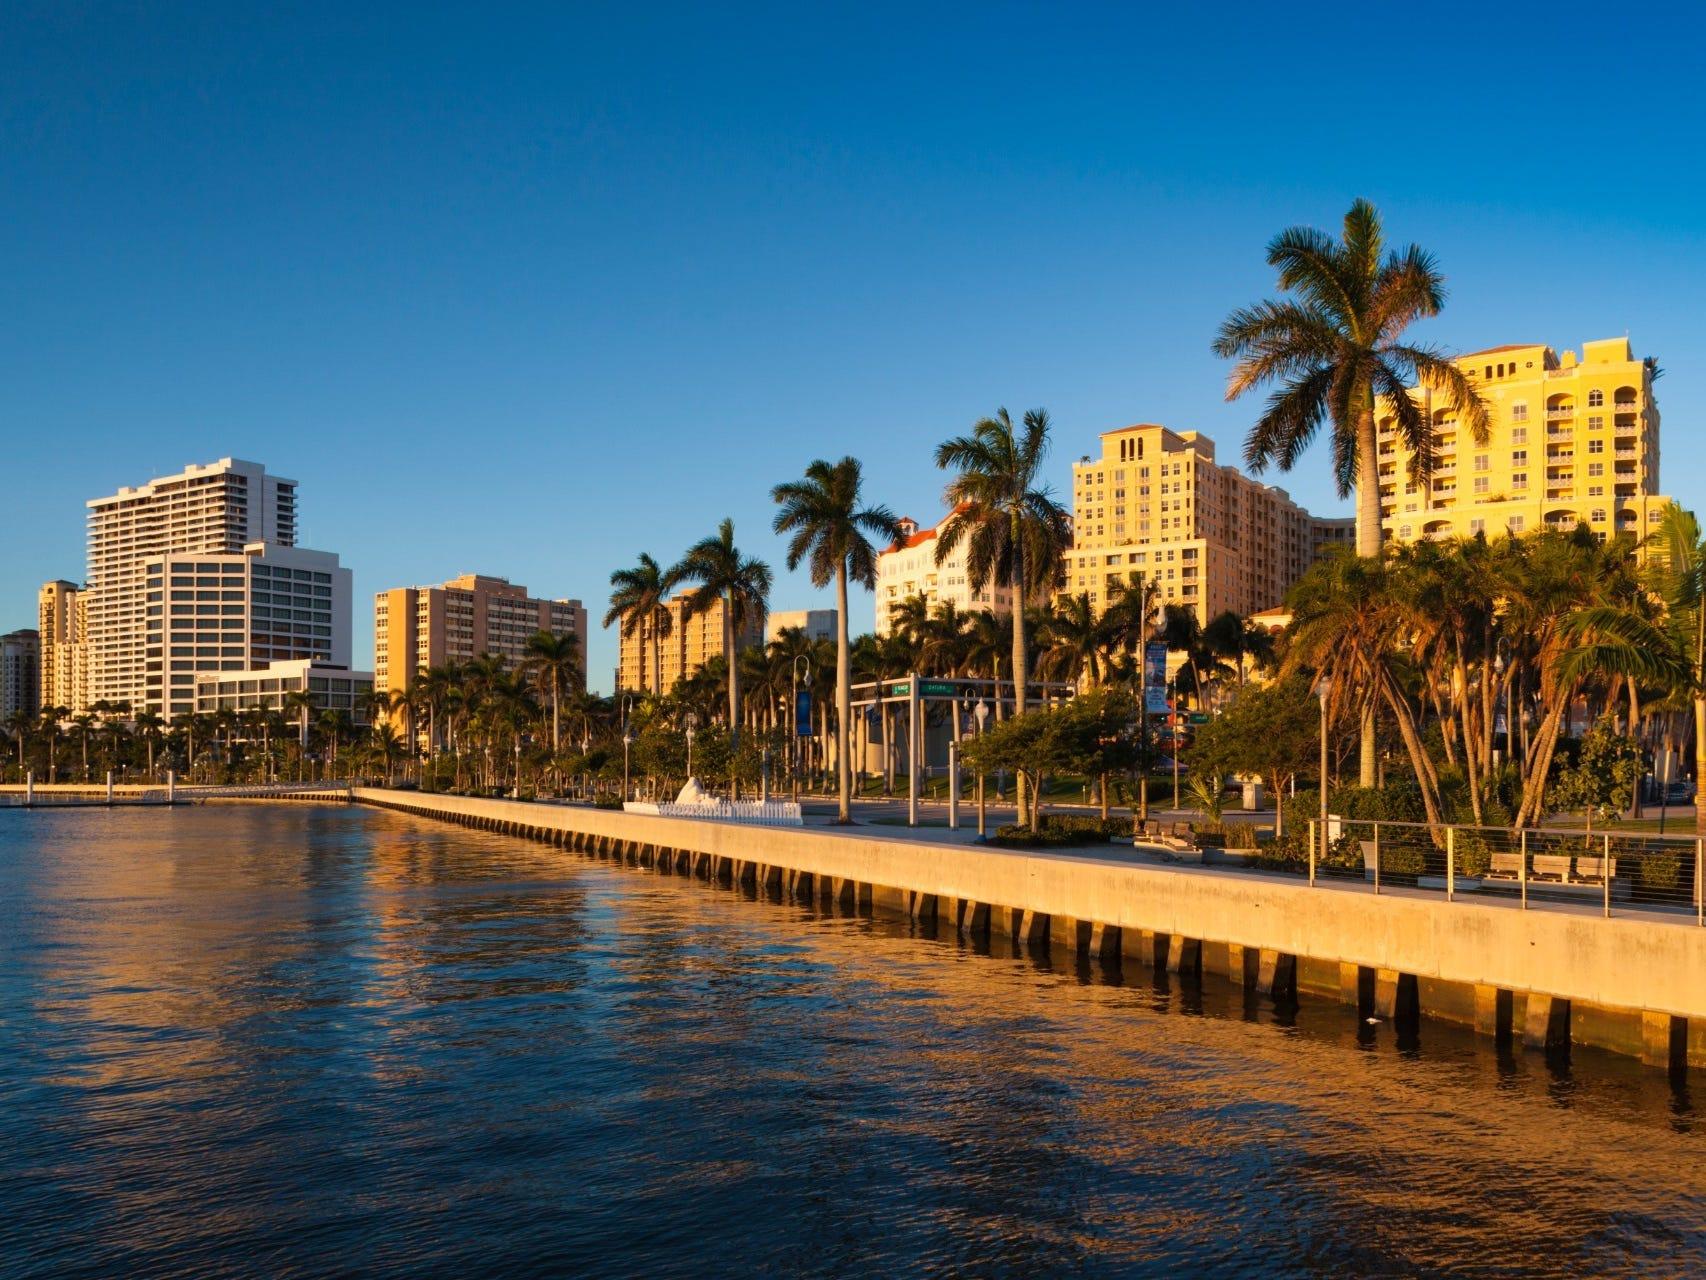 11. Between Los Angeles and West Palm Beach, Florida.